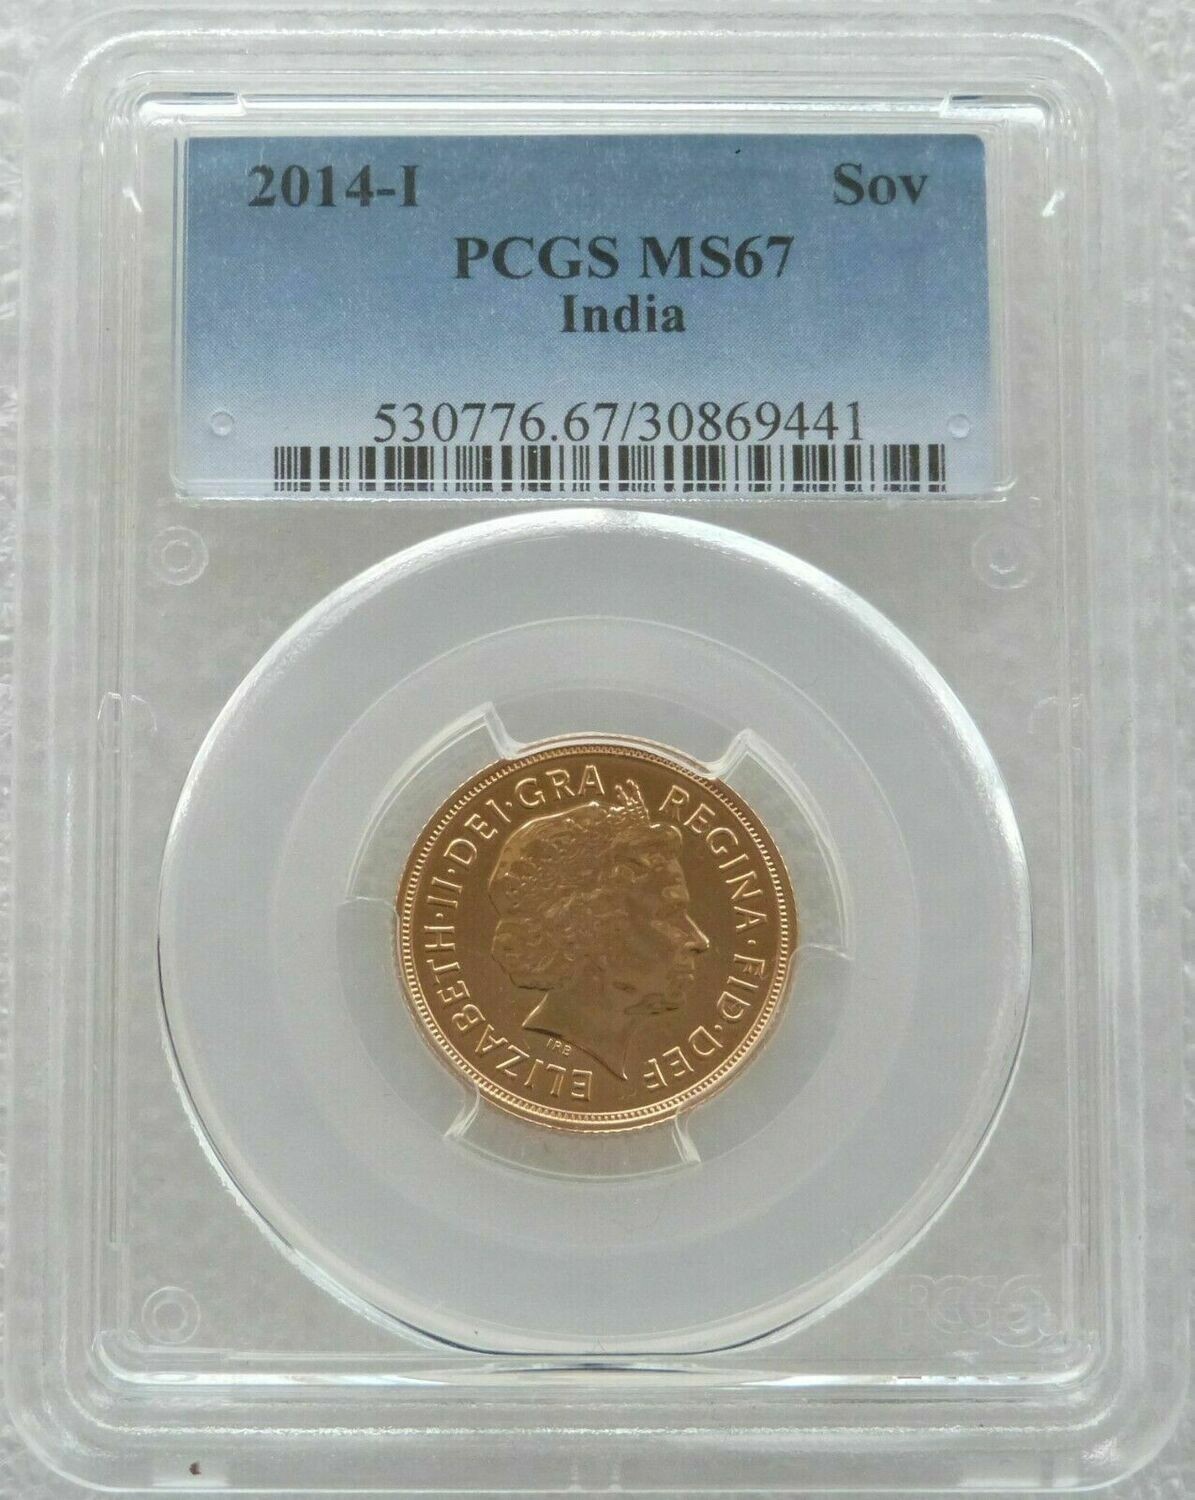 2014-I India Mint Mark Full Sovereign Gold Coin PCGS MS67